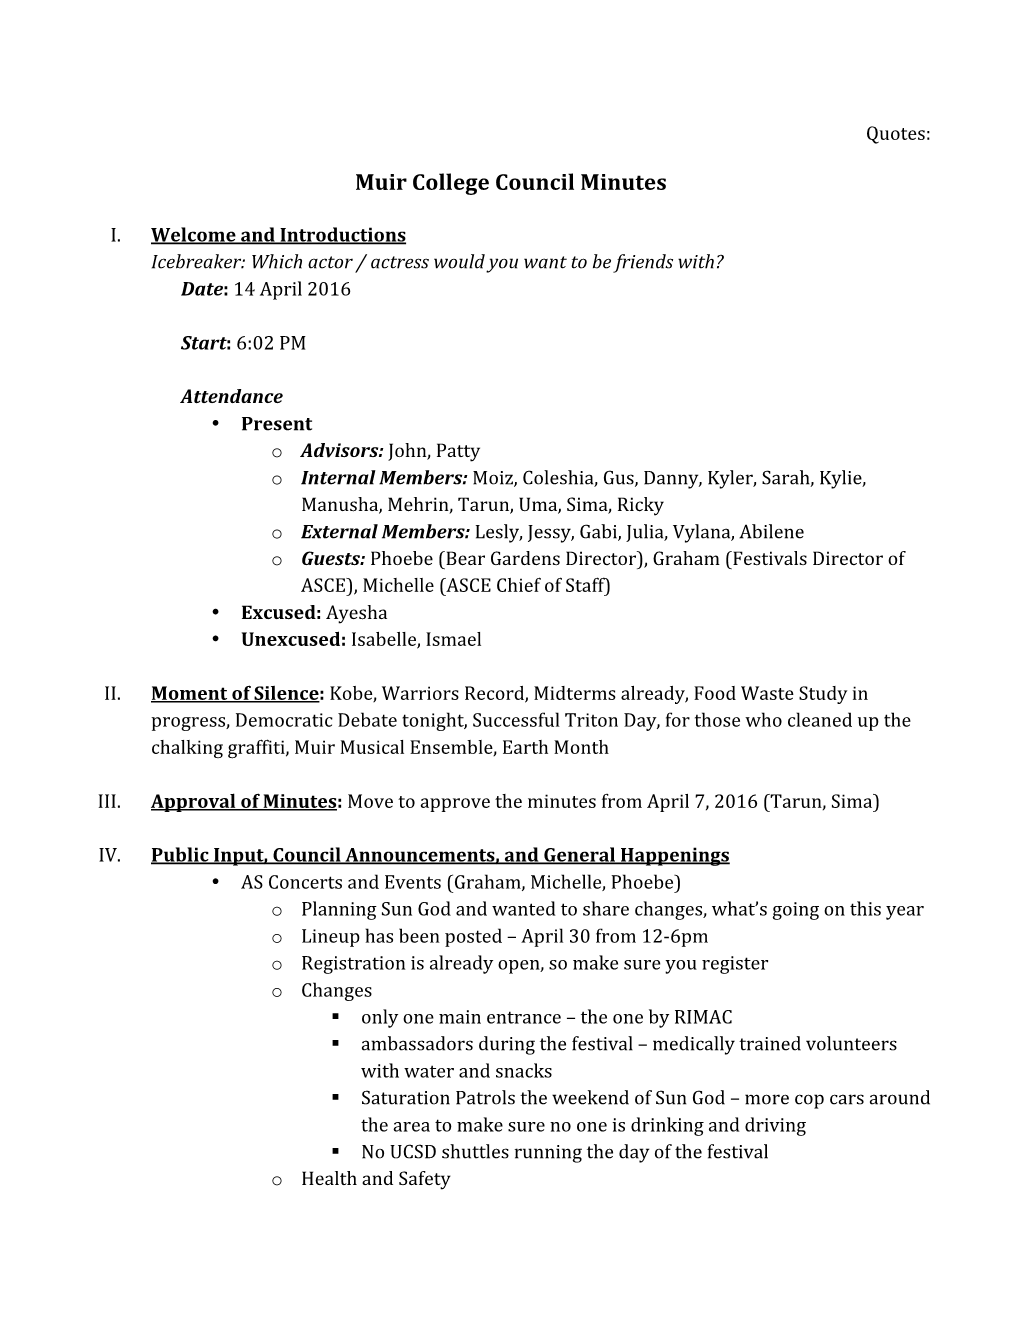 Muir College Council Minutes